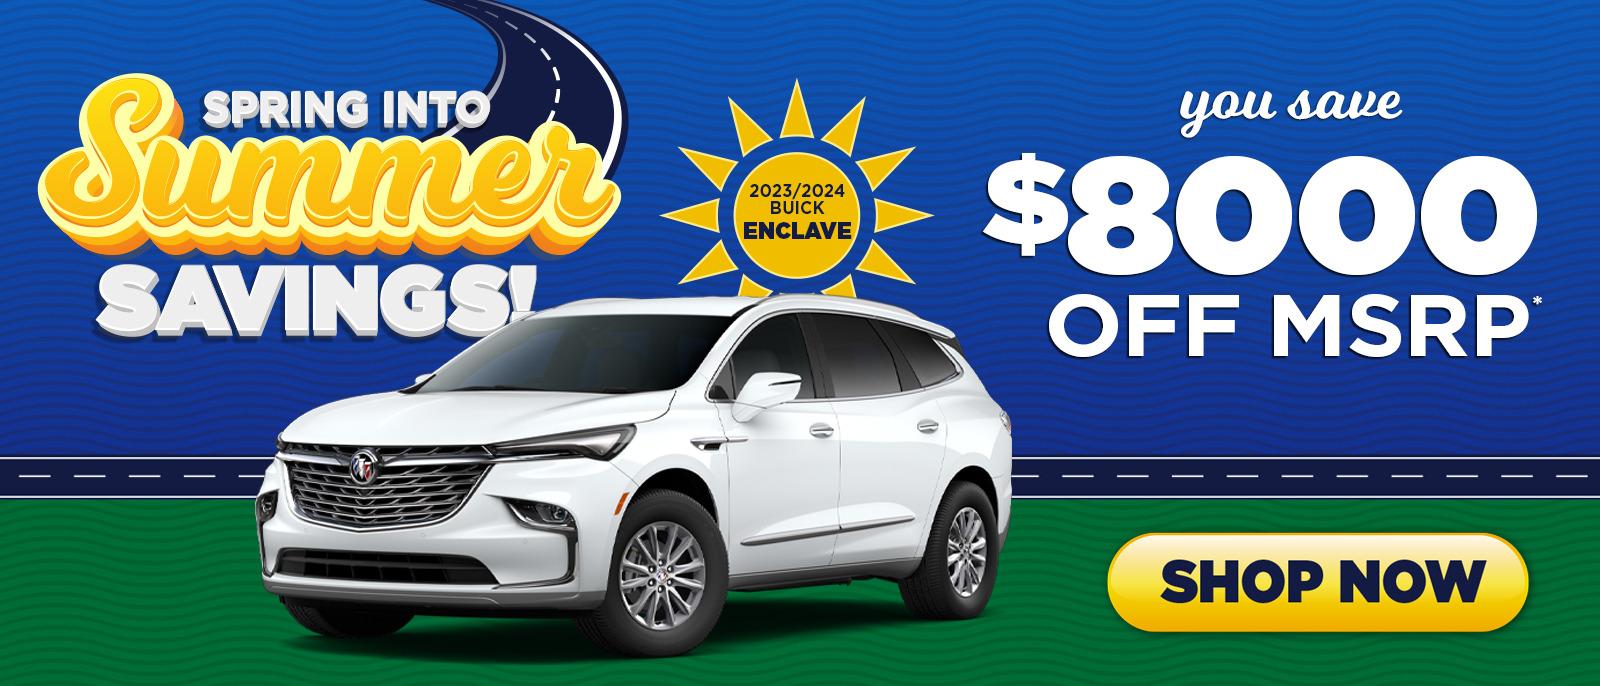 2023/2024 Buick Enclave - You Save $8000 Off MSRP